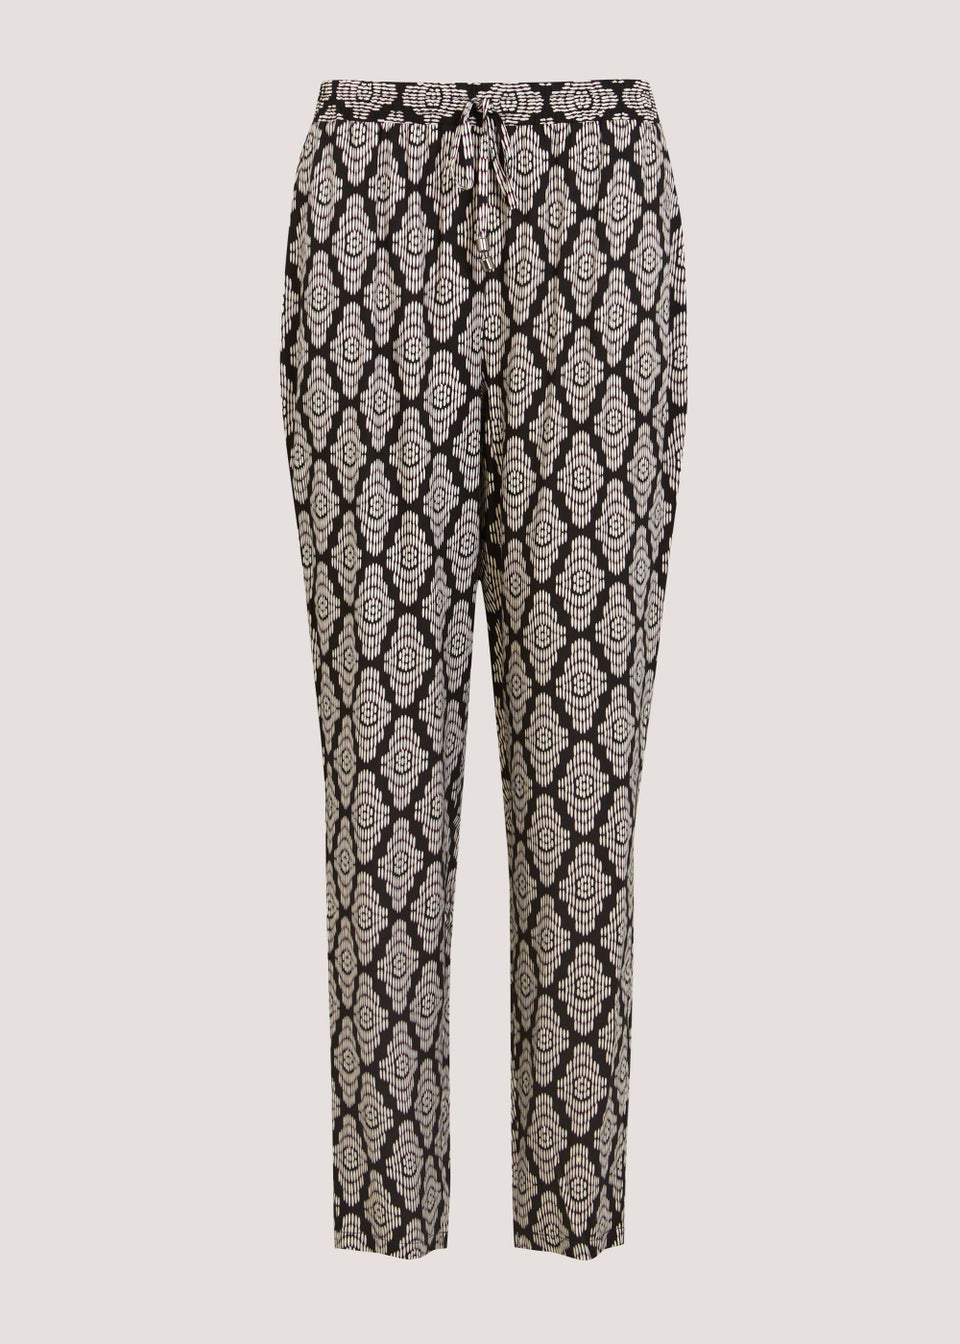 Share more than 146 ladies patterned trousers super hot